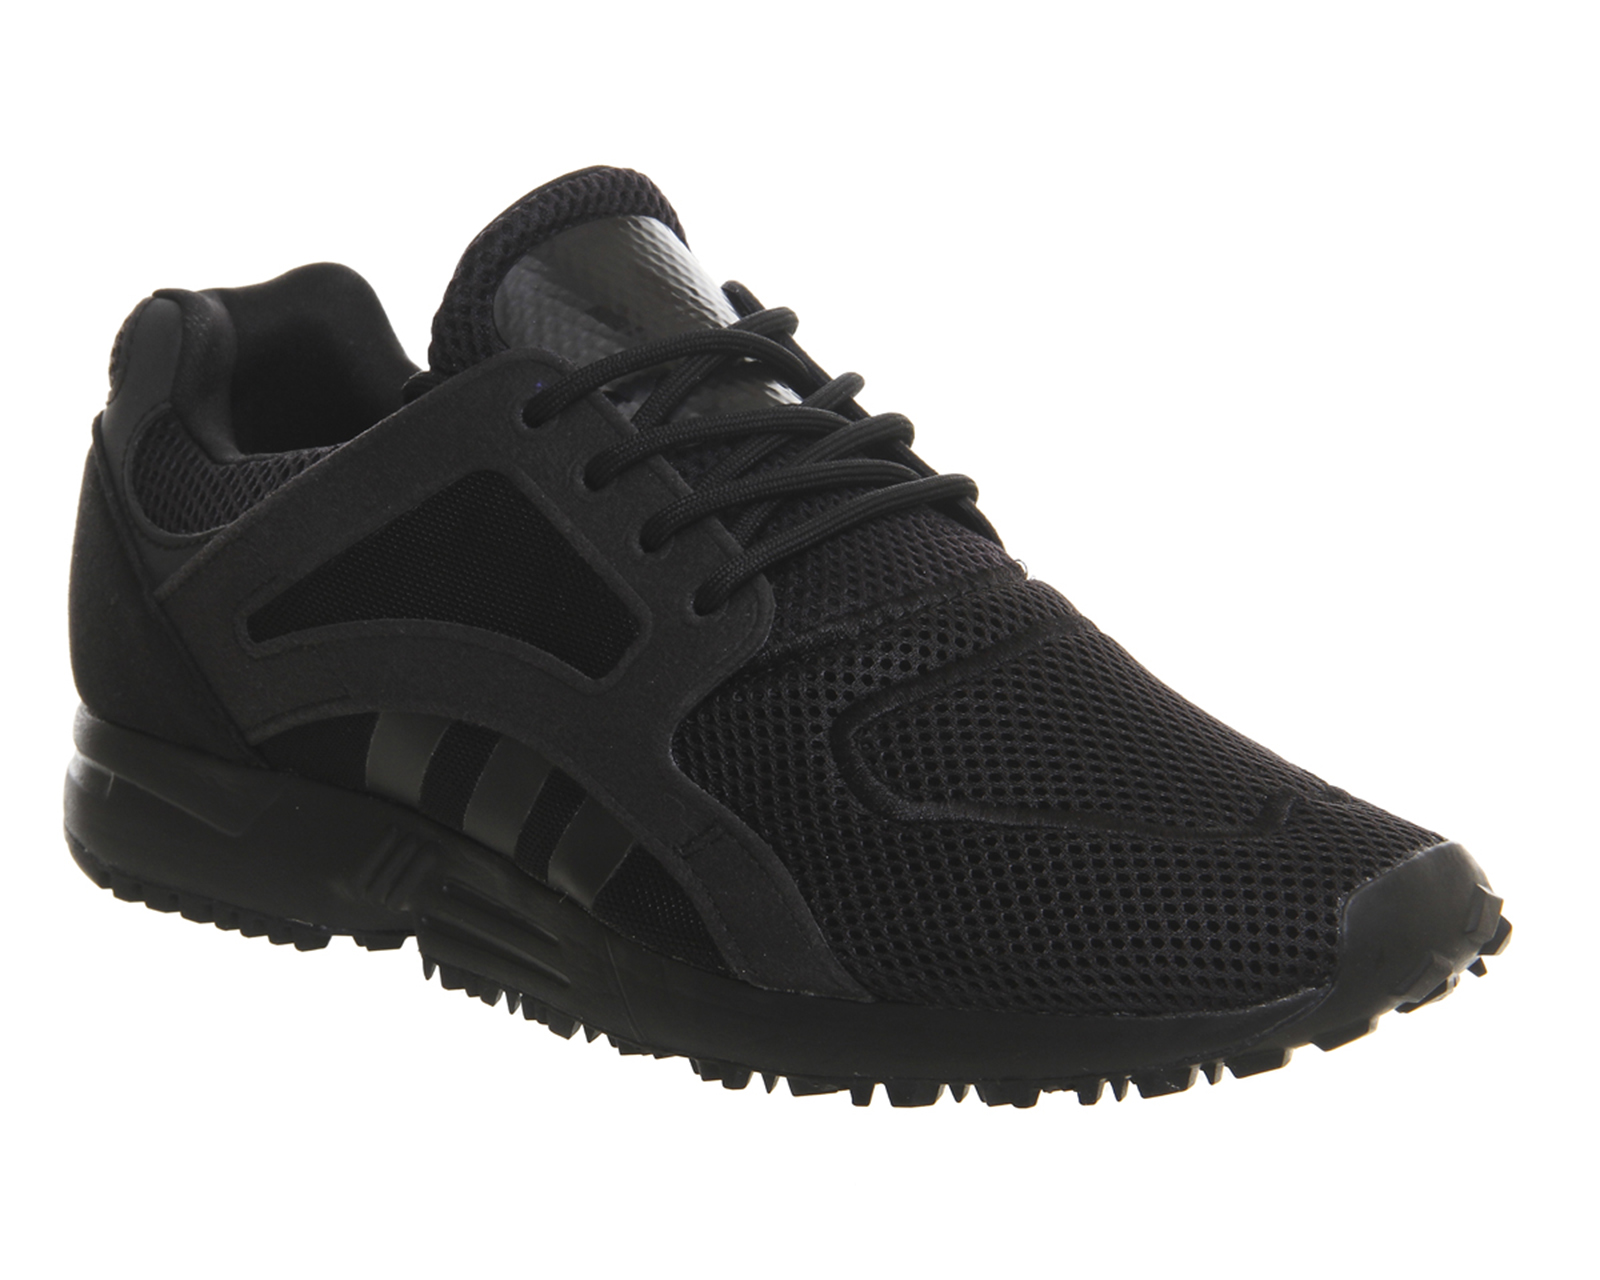 Adidas Racer Lite Clearance, GET 52% OFF, www.peopletray.com